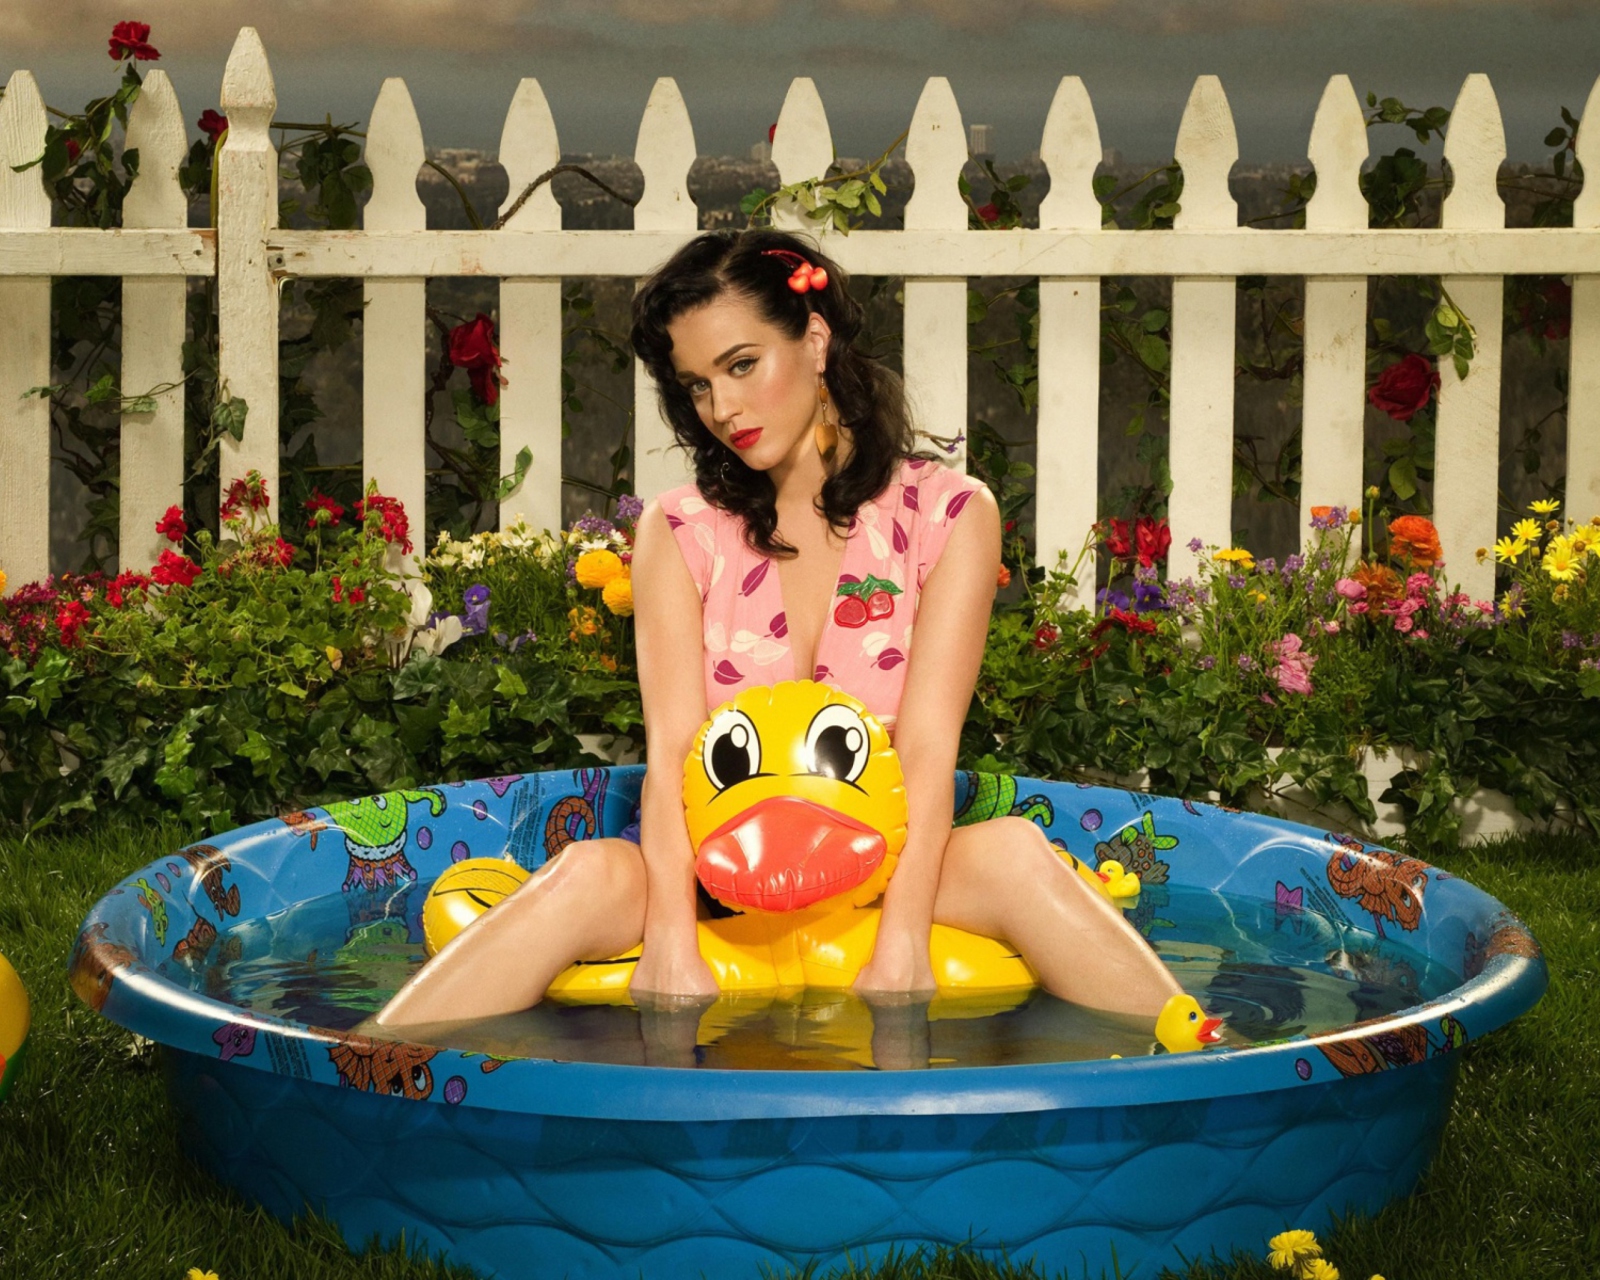 Katy Perry And Yellow Duck wallpaper 1600x1280